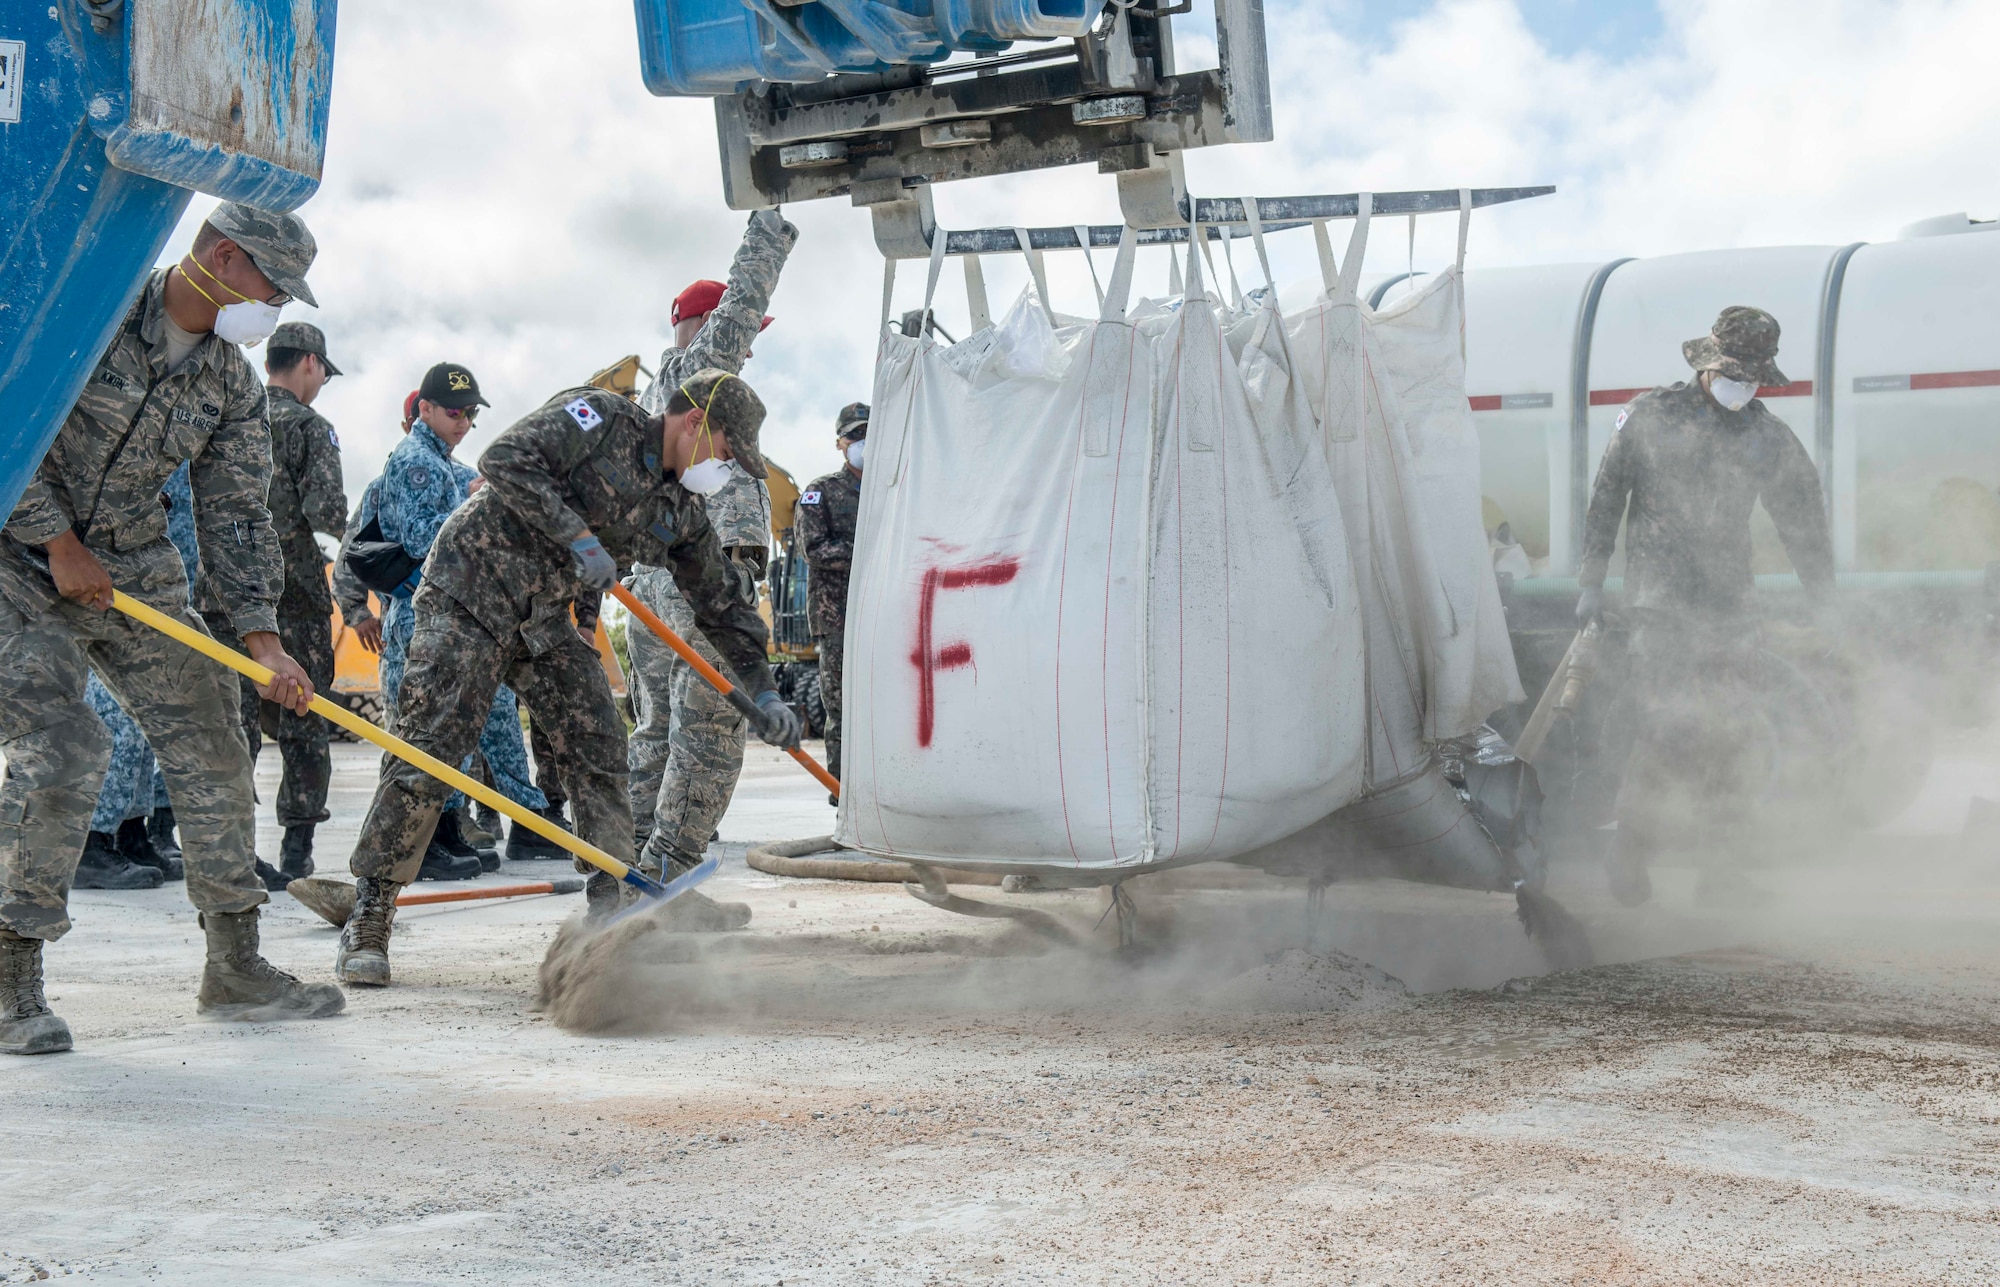 Airmen of the Royal Australian Air Force, Republic of Korea Air Force, Republic of Singapore Air Force and U.S. Air Force fill concrete mix into a hole during exercise Silver Flag, at Northwest Field, Guam, April 24, 2018. Teams faced a simulated aftermath of a base attack and having to repair facilities and the airfield to ensure that they can repair the airfield and return it to safe use for aviators. (U.S. Air Force by Airman 1st Class Christopher Quail)